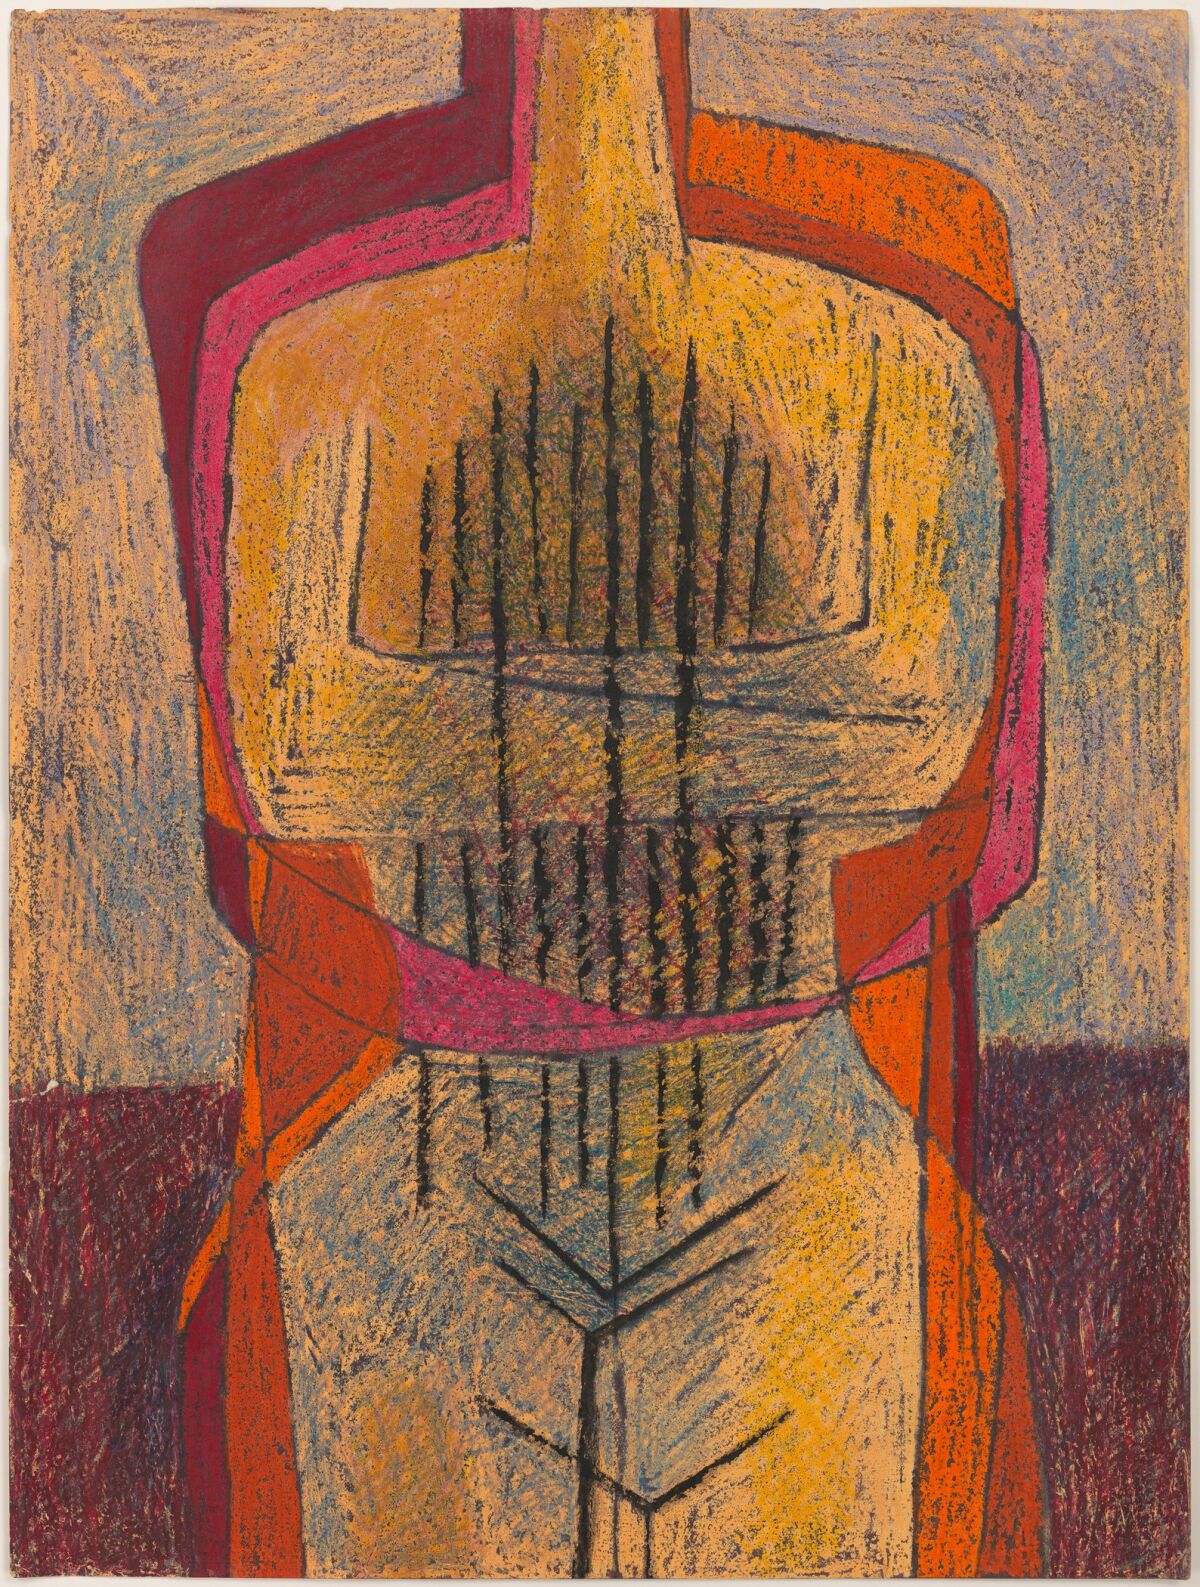 LACMA recently acquired one of Luchita Hurtado's untitled works.